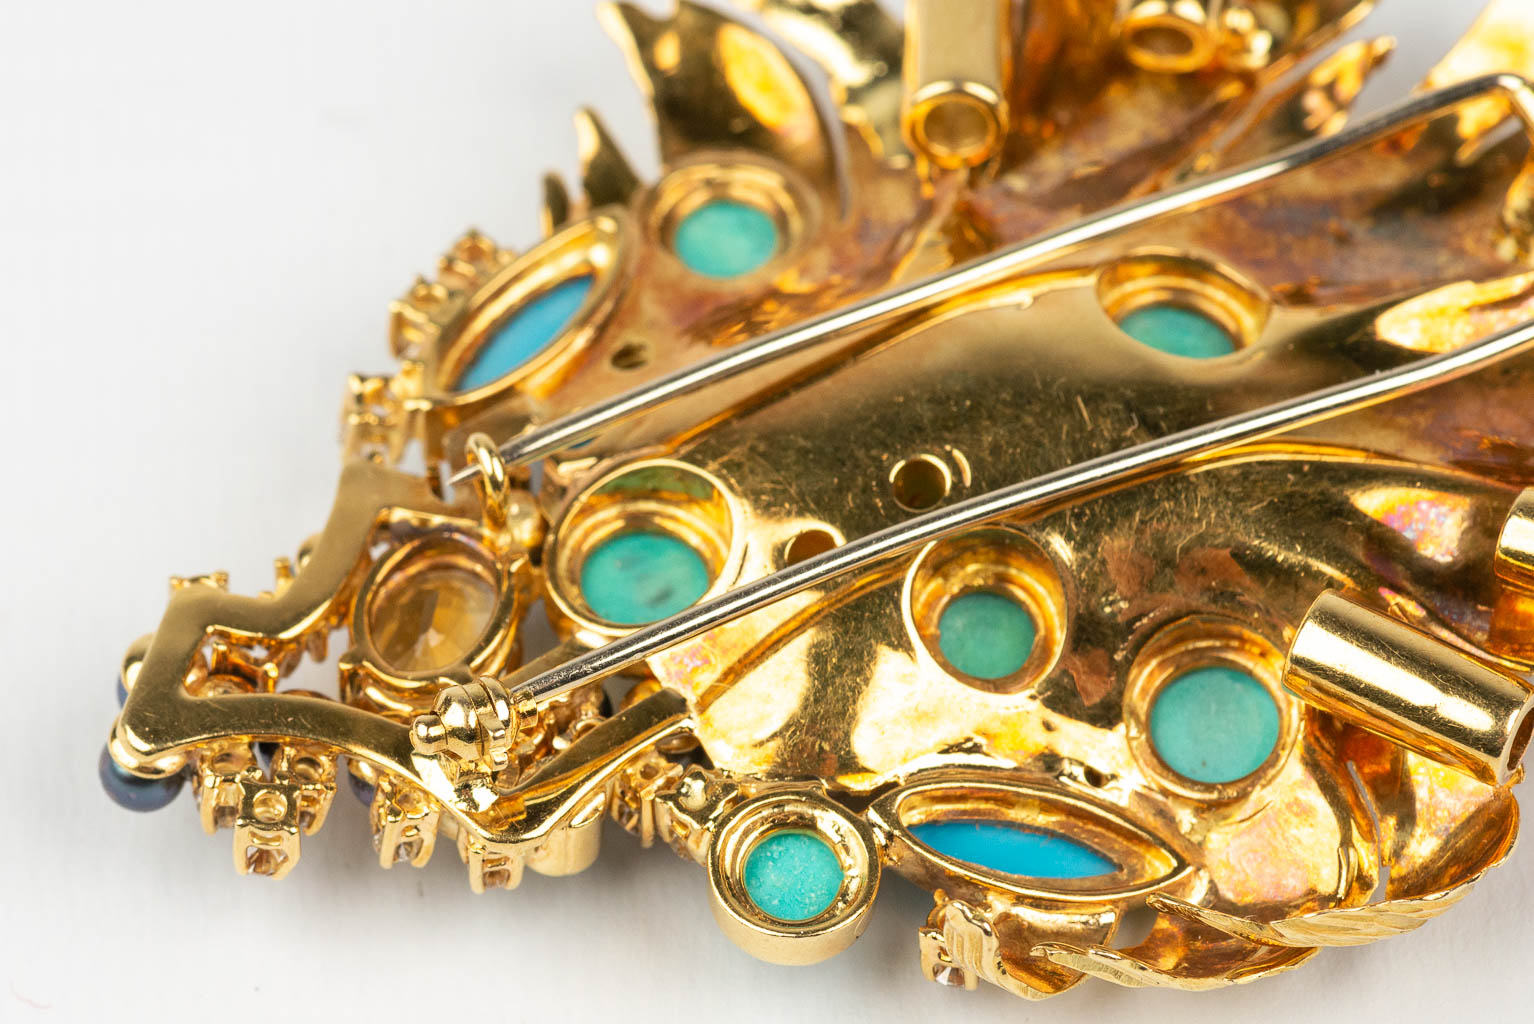 A large brooch decorated with multiple different precious stones, diamonds, in an 18 karat yellow gold design. 